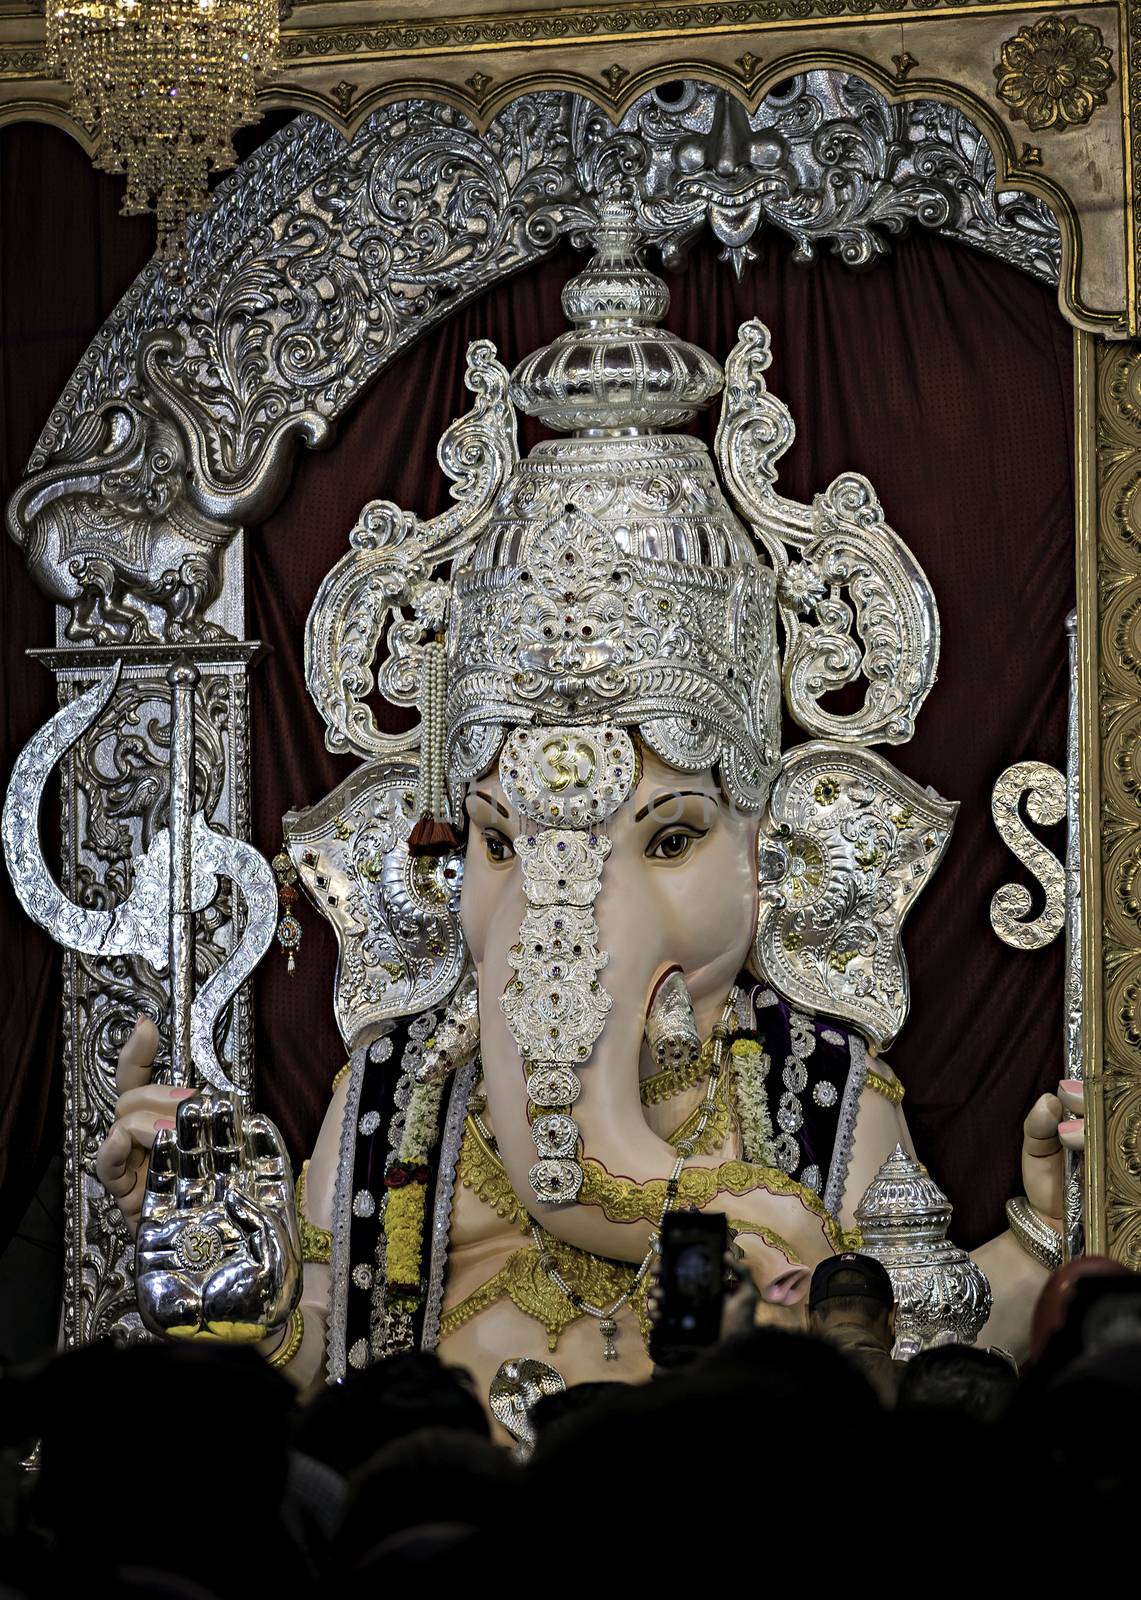 Huge idol of Lord Ganesh installed by  Tulshibaug Mandal  during Ganesh festival in Pune, India. by lalam